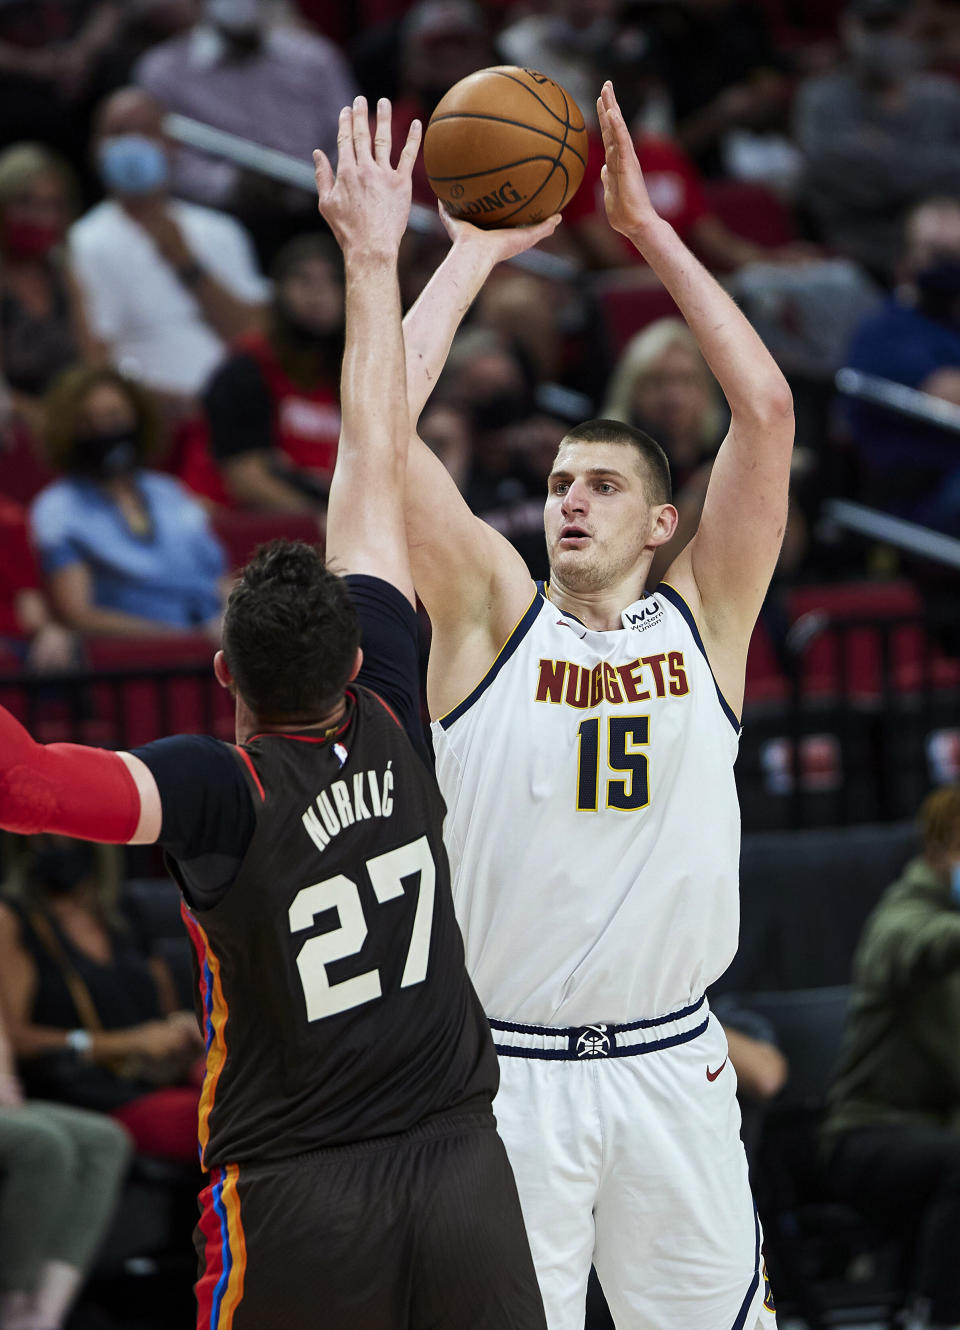 Denver Nuggets center Nikola Jokic shoots over Portland Trail Blazers center Jusuf Nurkic during the first half of Game 6 of an NBA basketball first-round playoff series Thursday, June 3, 2021, in Portland, Ore. (AP Photo/Craig Mitchelldyer)